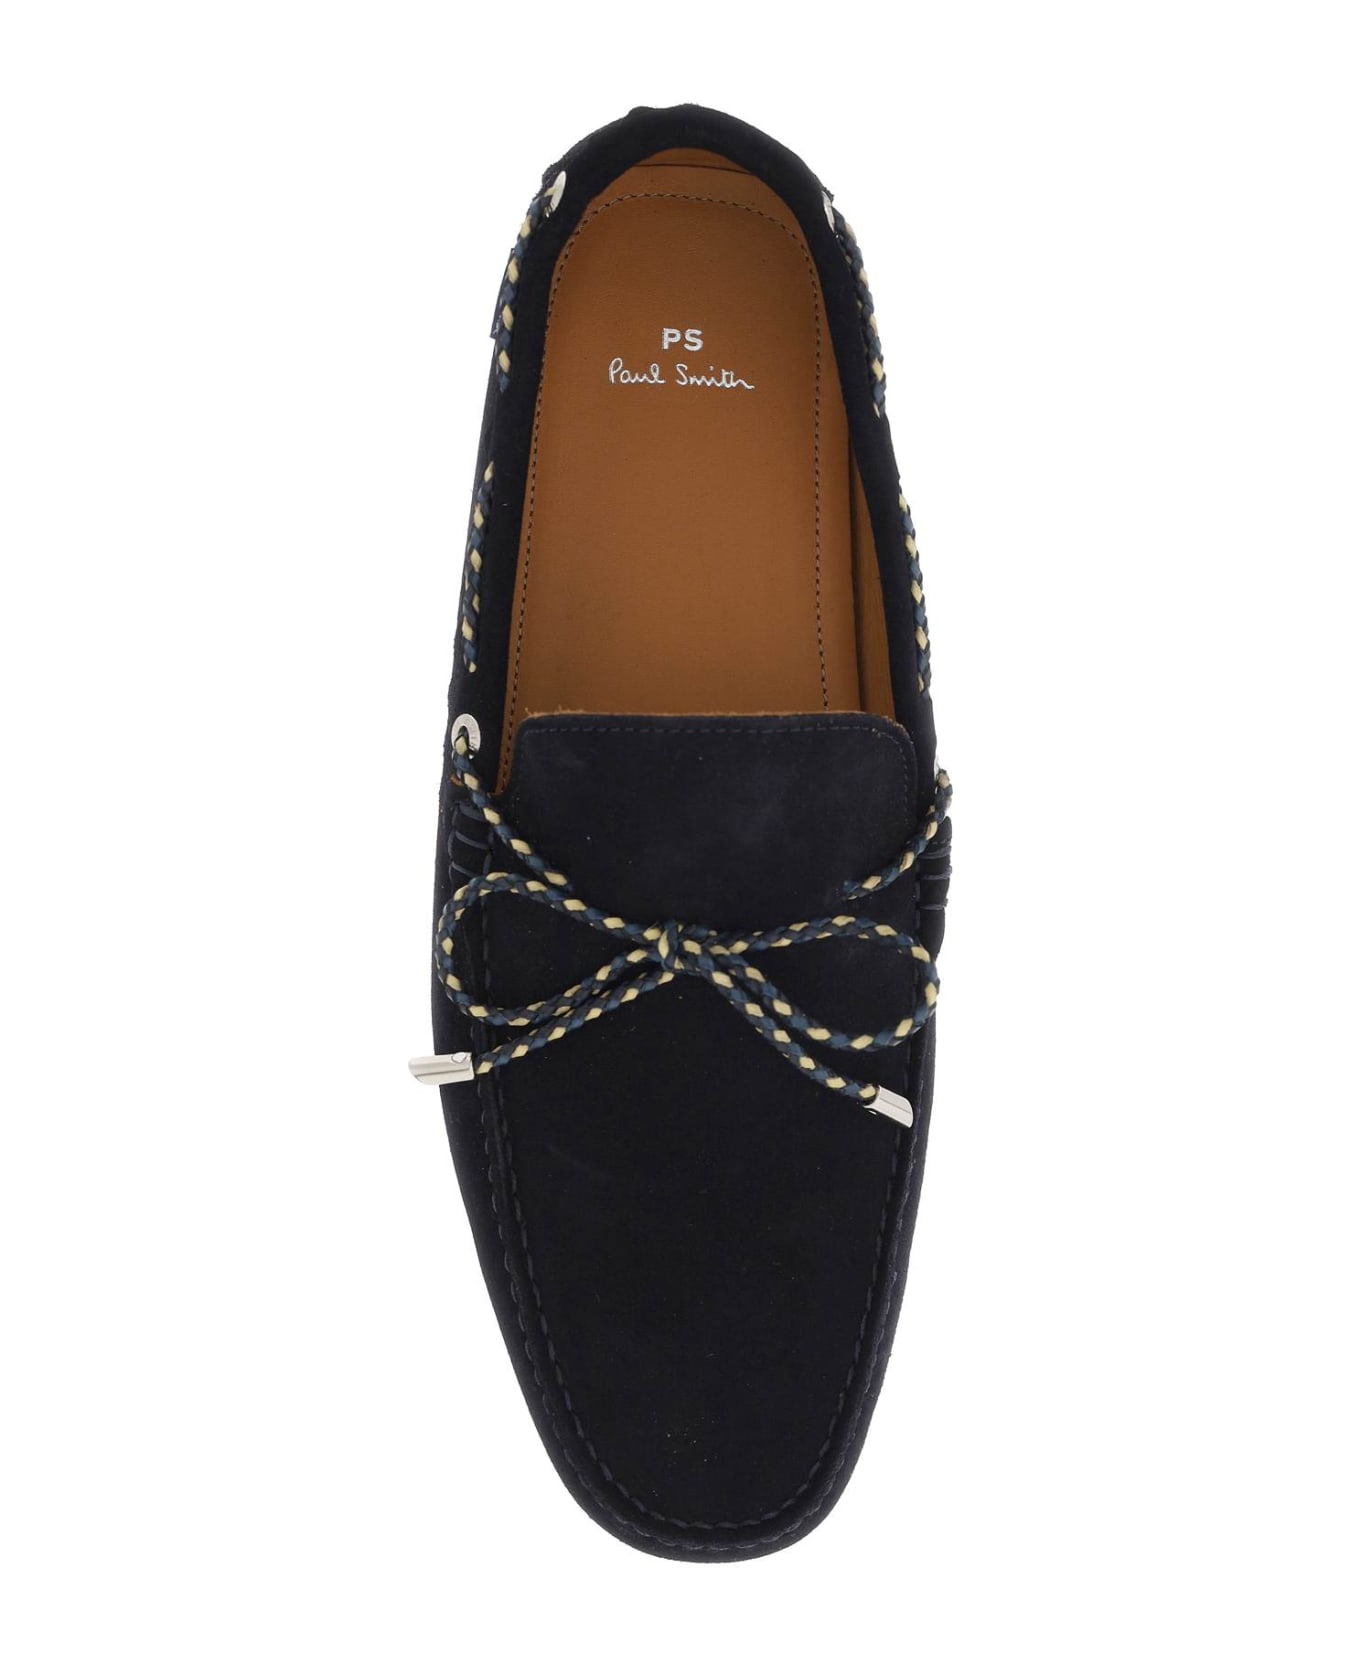 PS by Paul Smith Springfield Suede Loafers - VERY DARK NAVY (Blue)